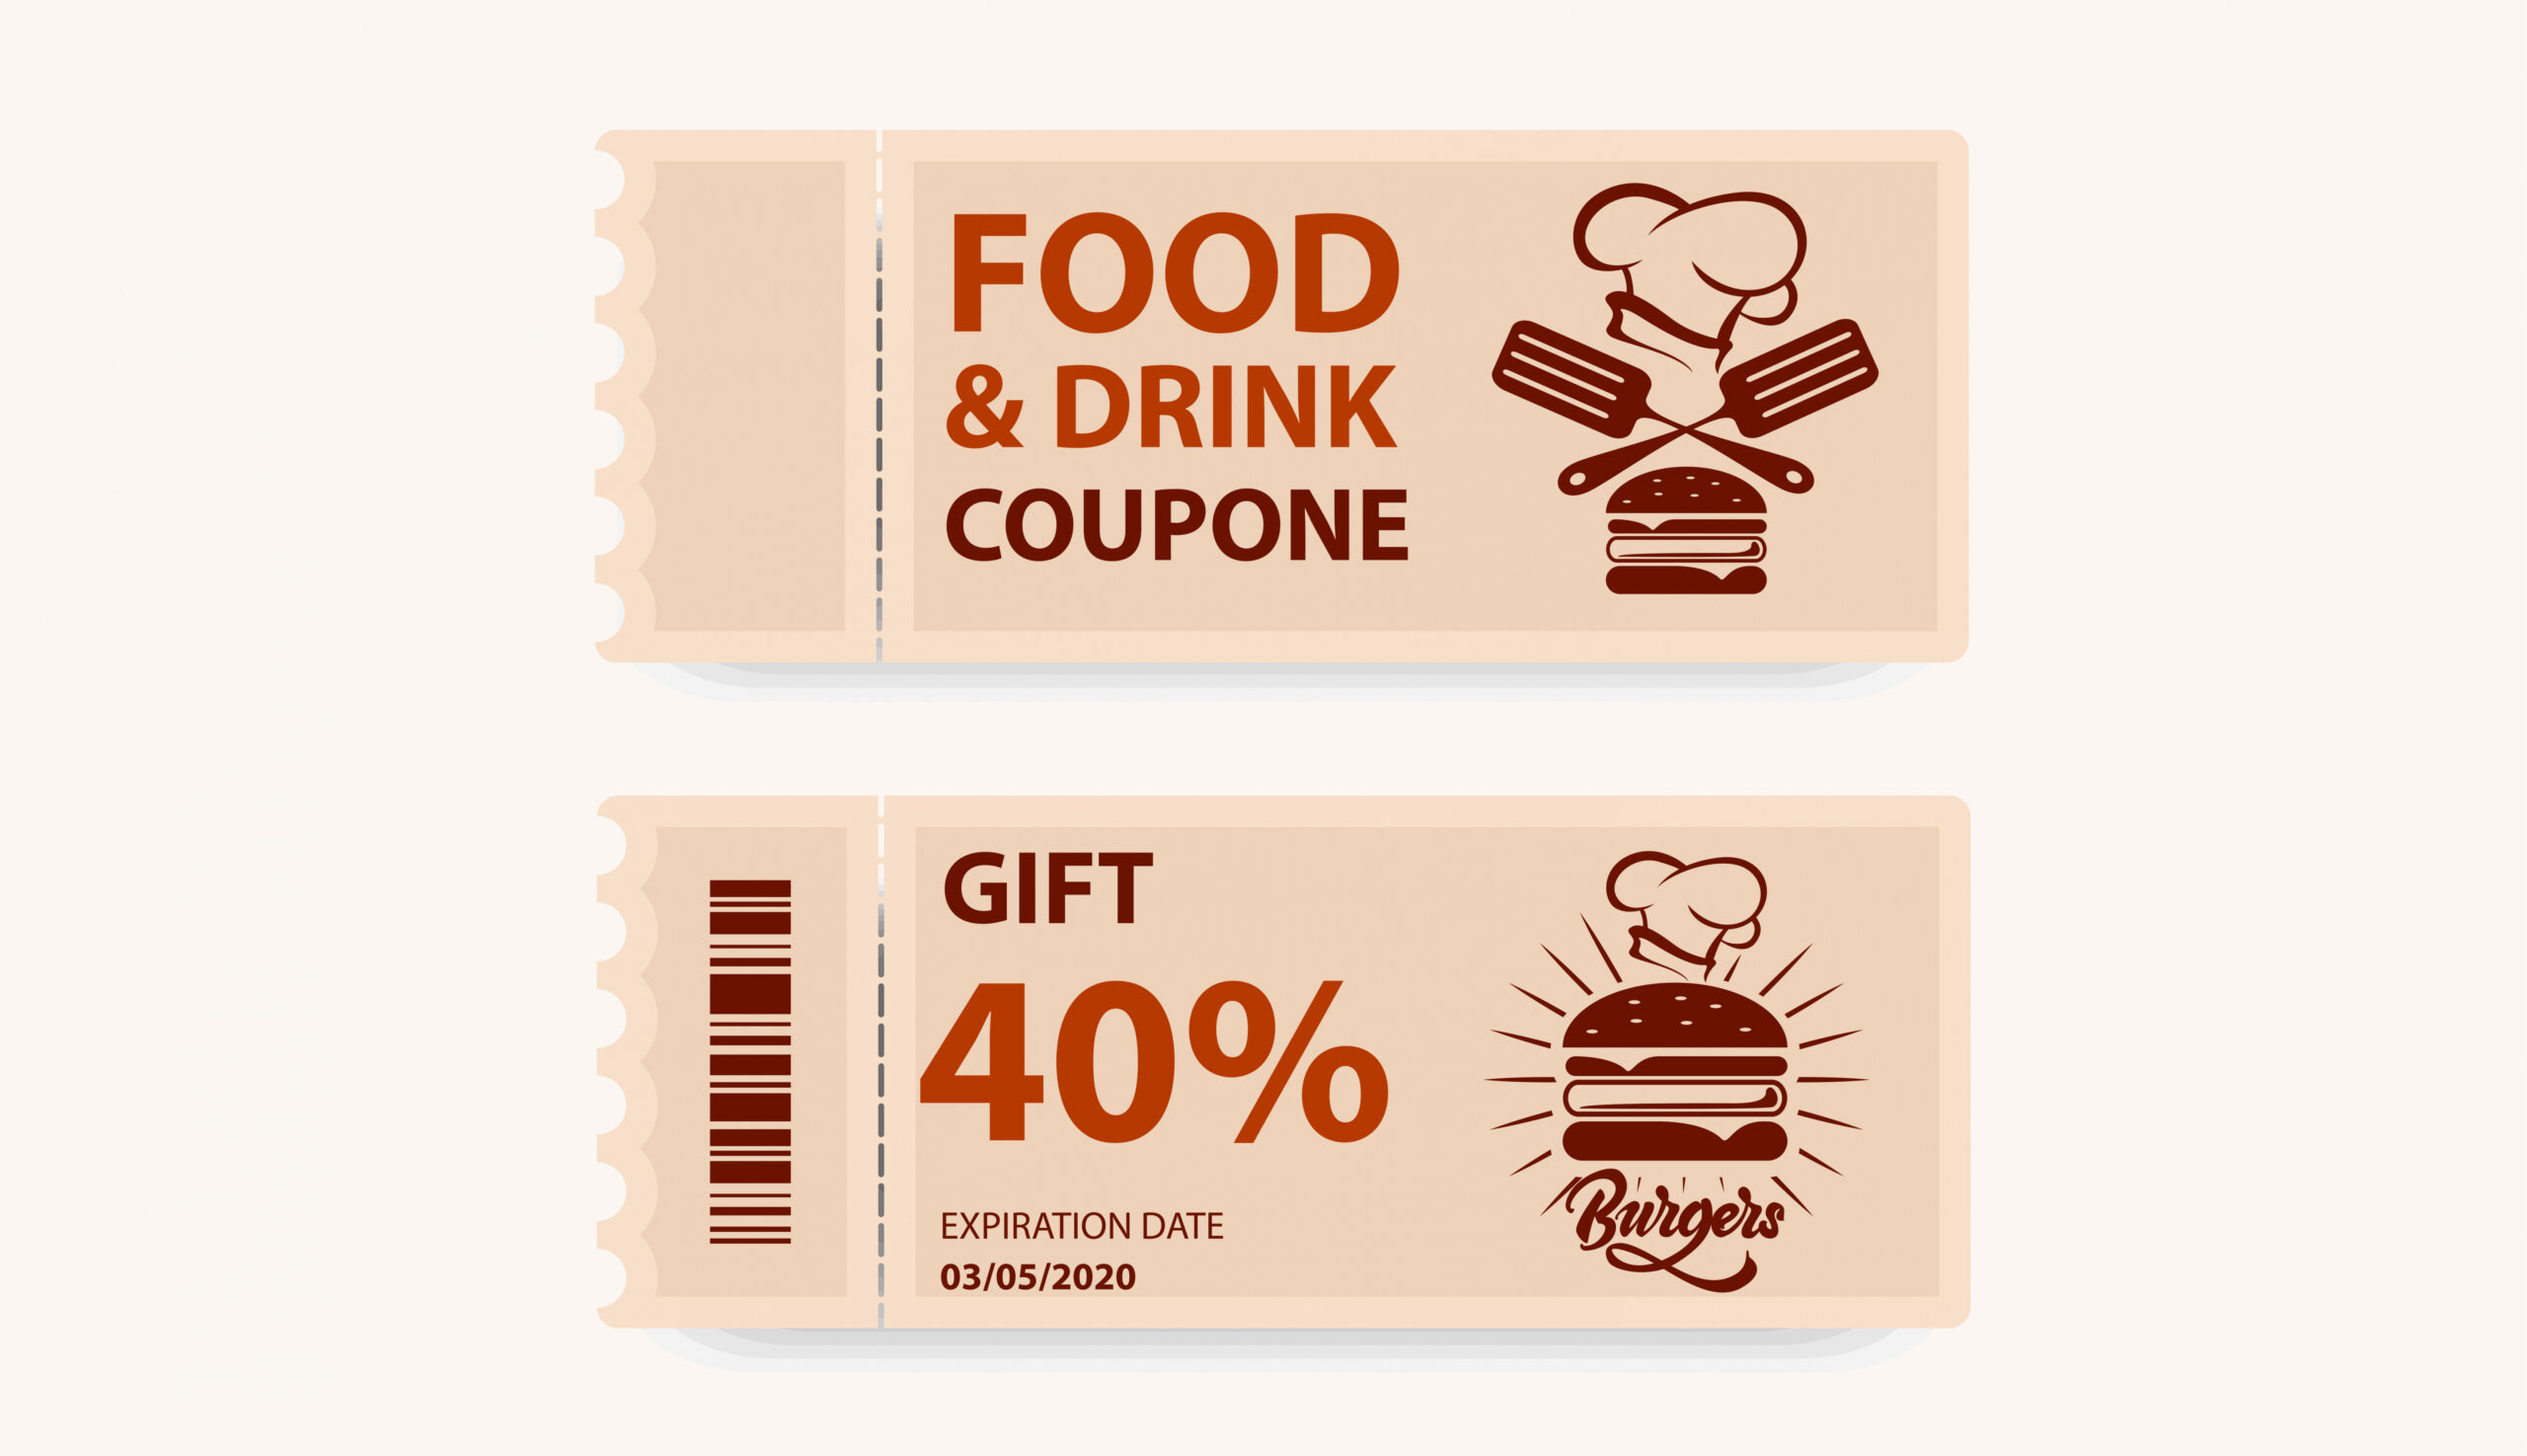 Free Printable Coupons For Food - Printable - Food Coupon Vector Art, Icons, and Graphics for Free Download